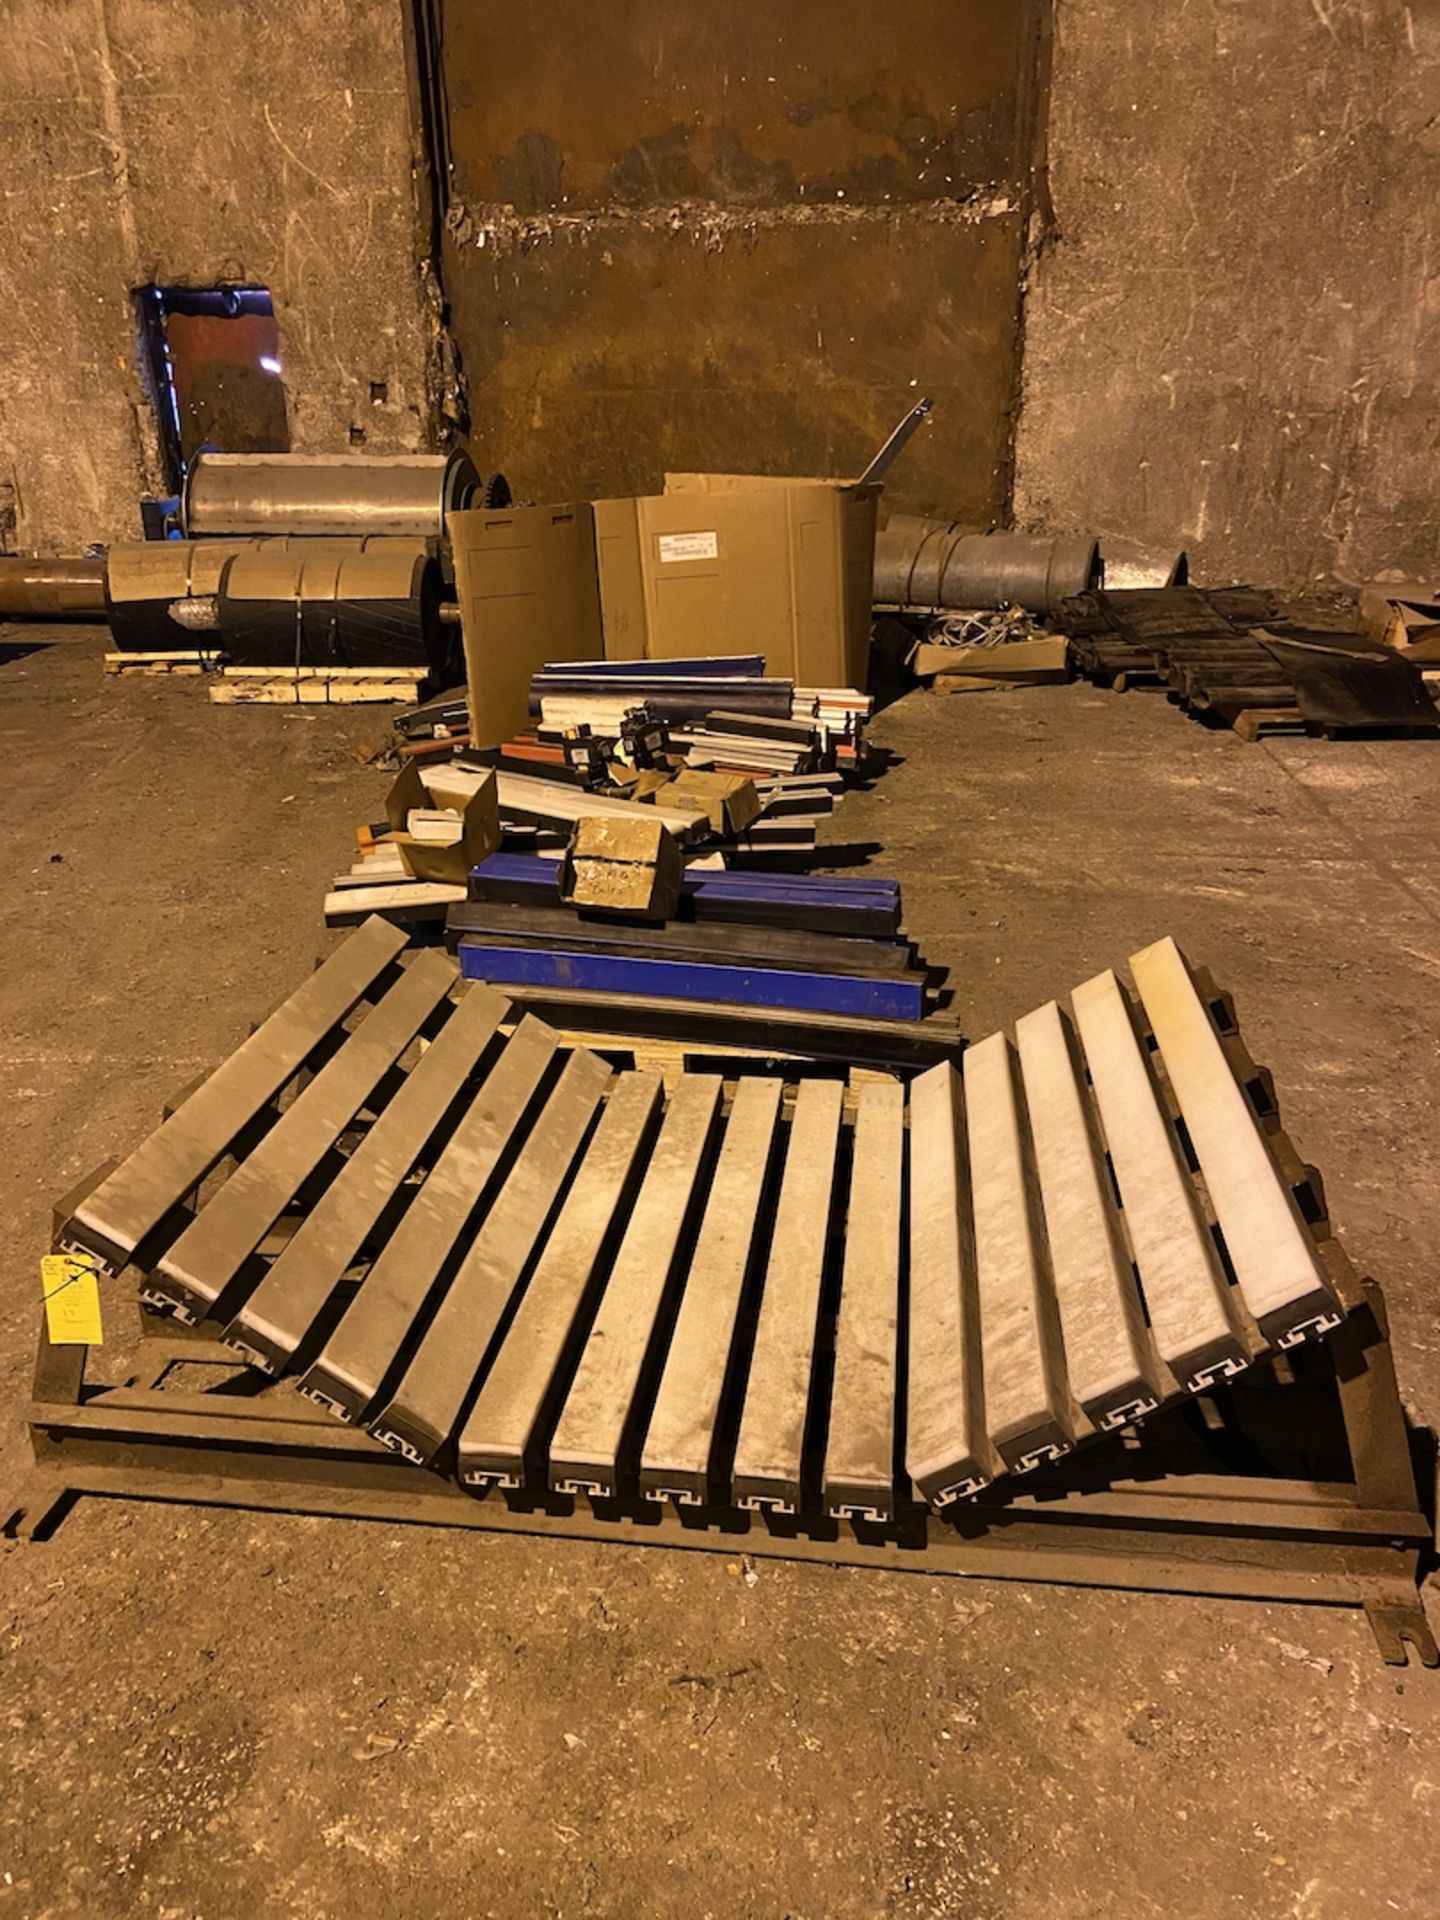 Conveyor Spare Parts (All Pictured, No Belts), Rigging/ Removal Fee: $1,000 - Image 2 of 9